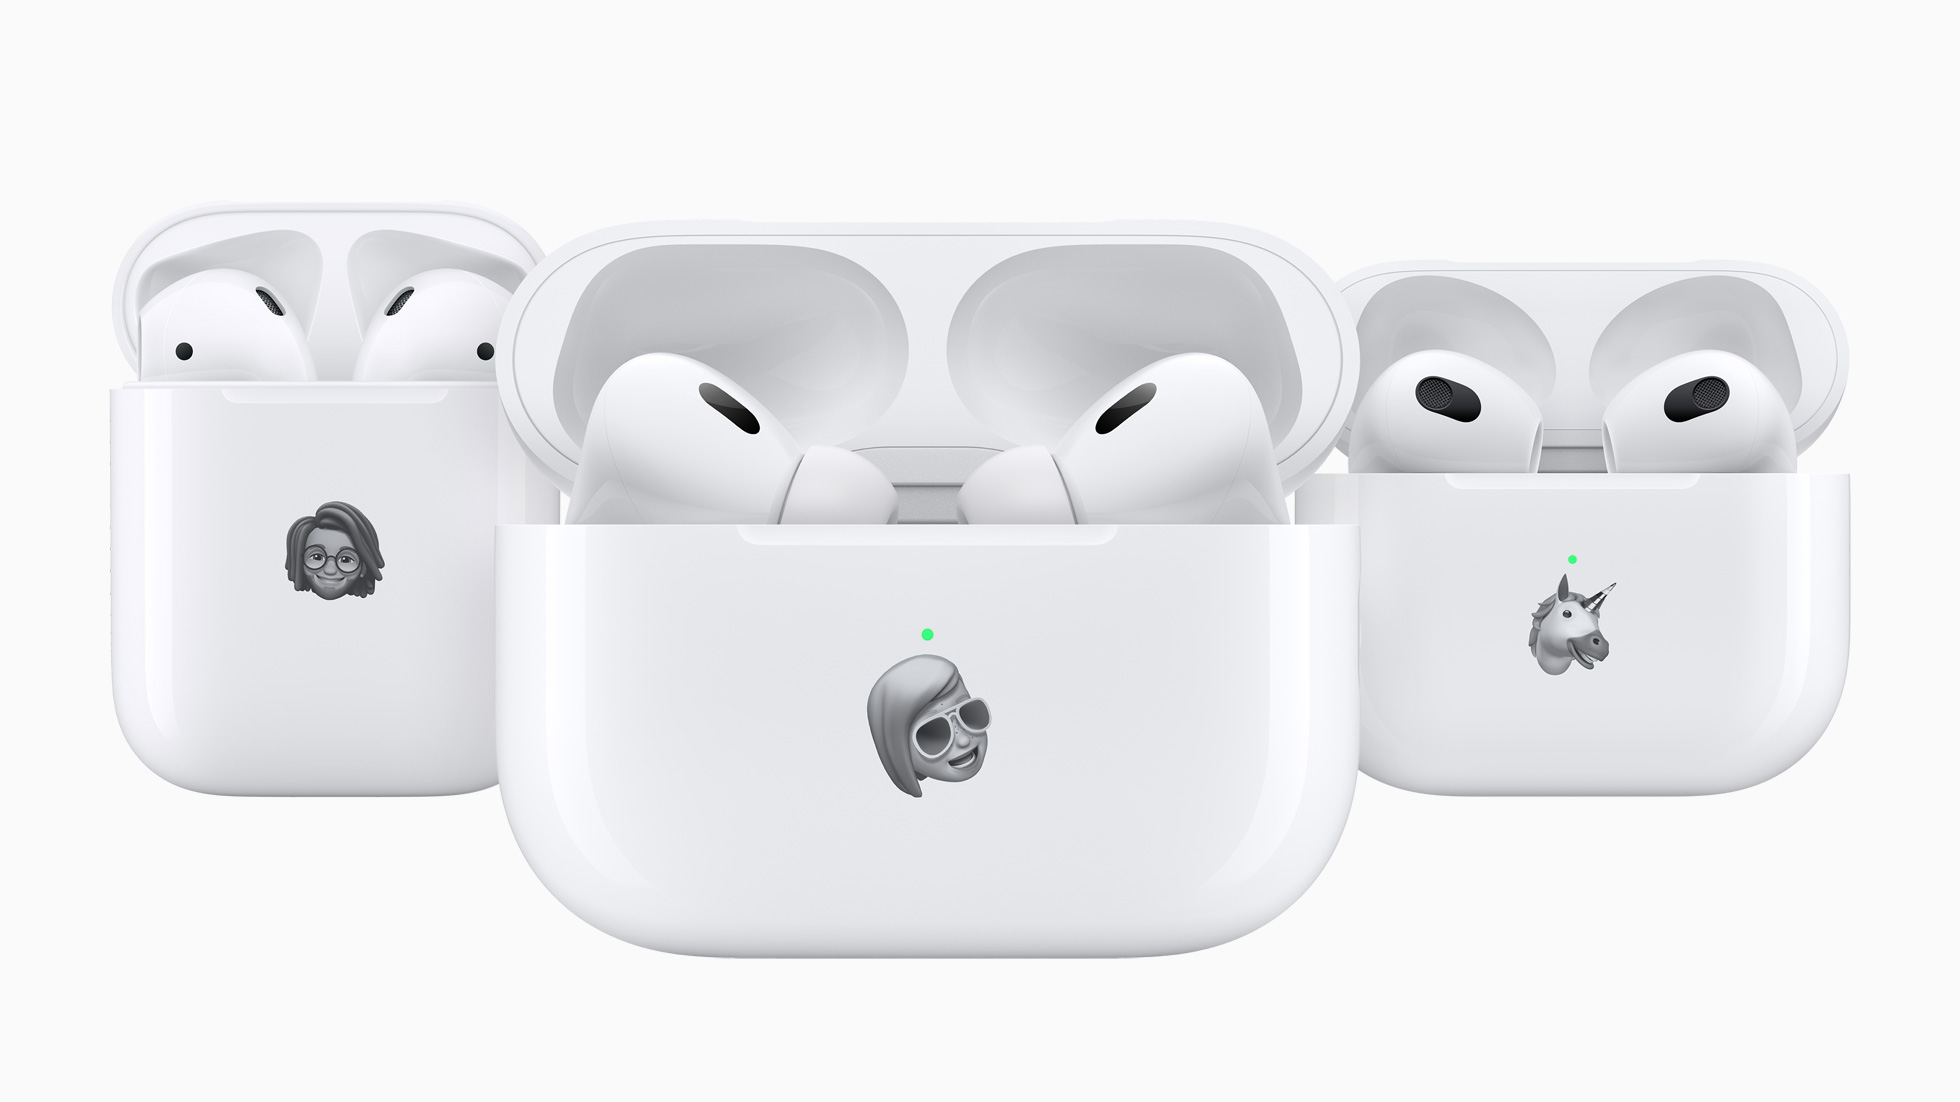 iOS 16 has learned to distinguish fake AirPods